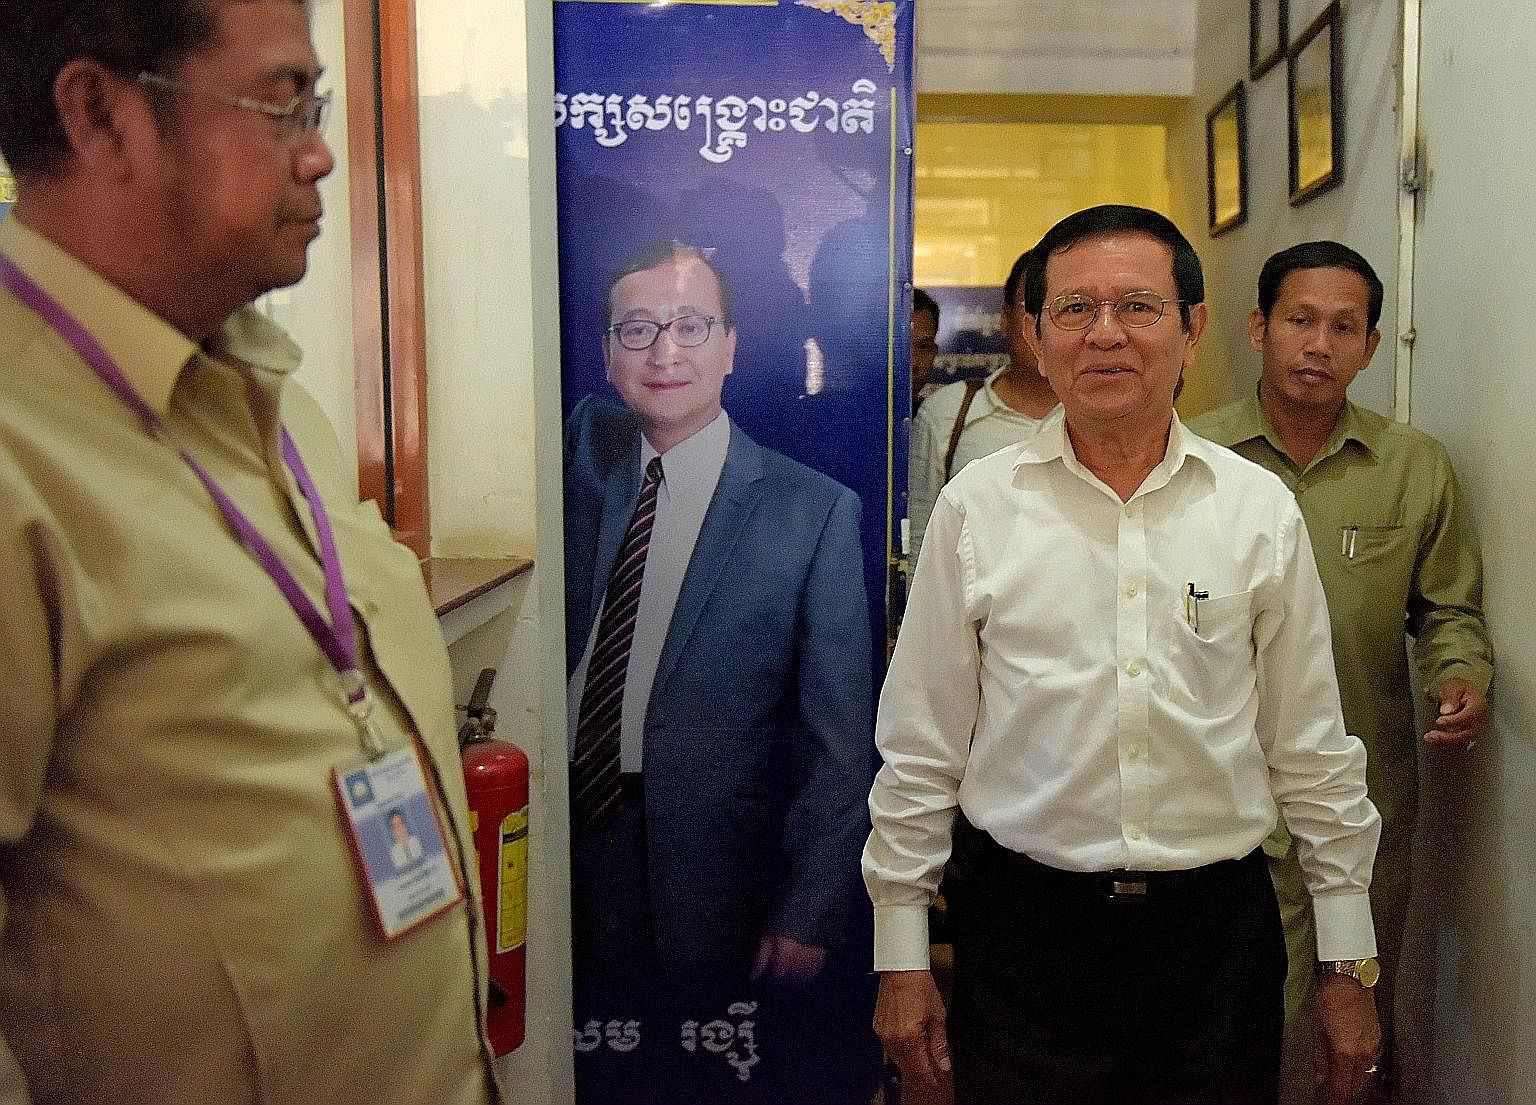 CNRP acting president Kem Sokha (in white shirt) walking past a portrait of exiled leader Sam Rainsy, who resigned as president of the opposition party recently, at its headquarters in Phnom Penh on Sunday. CNRP, Cambodia's leading opposition party, 